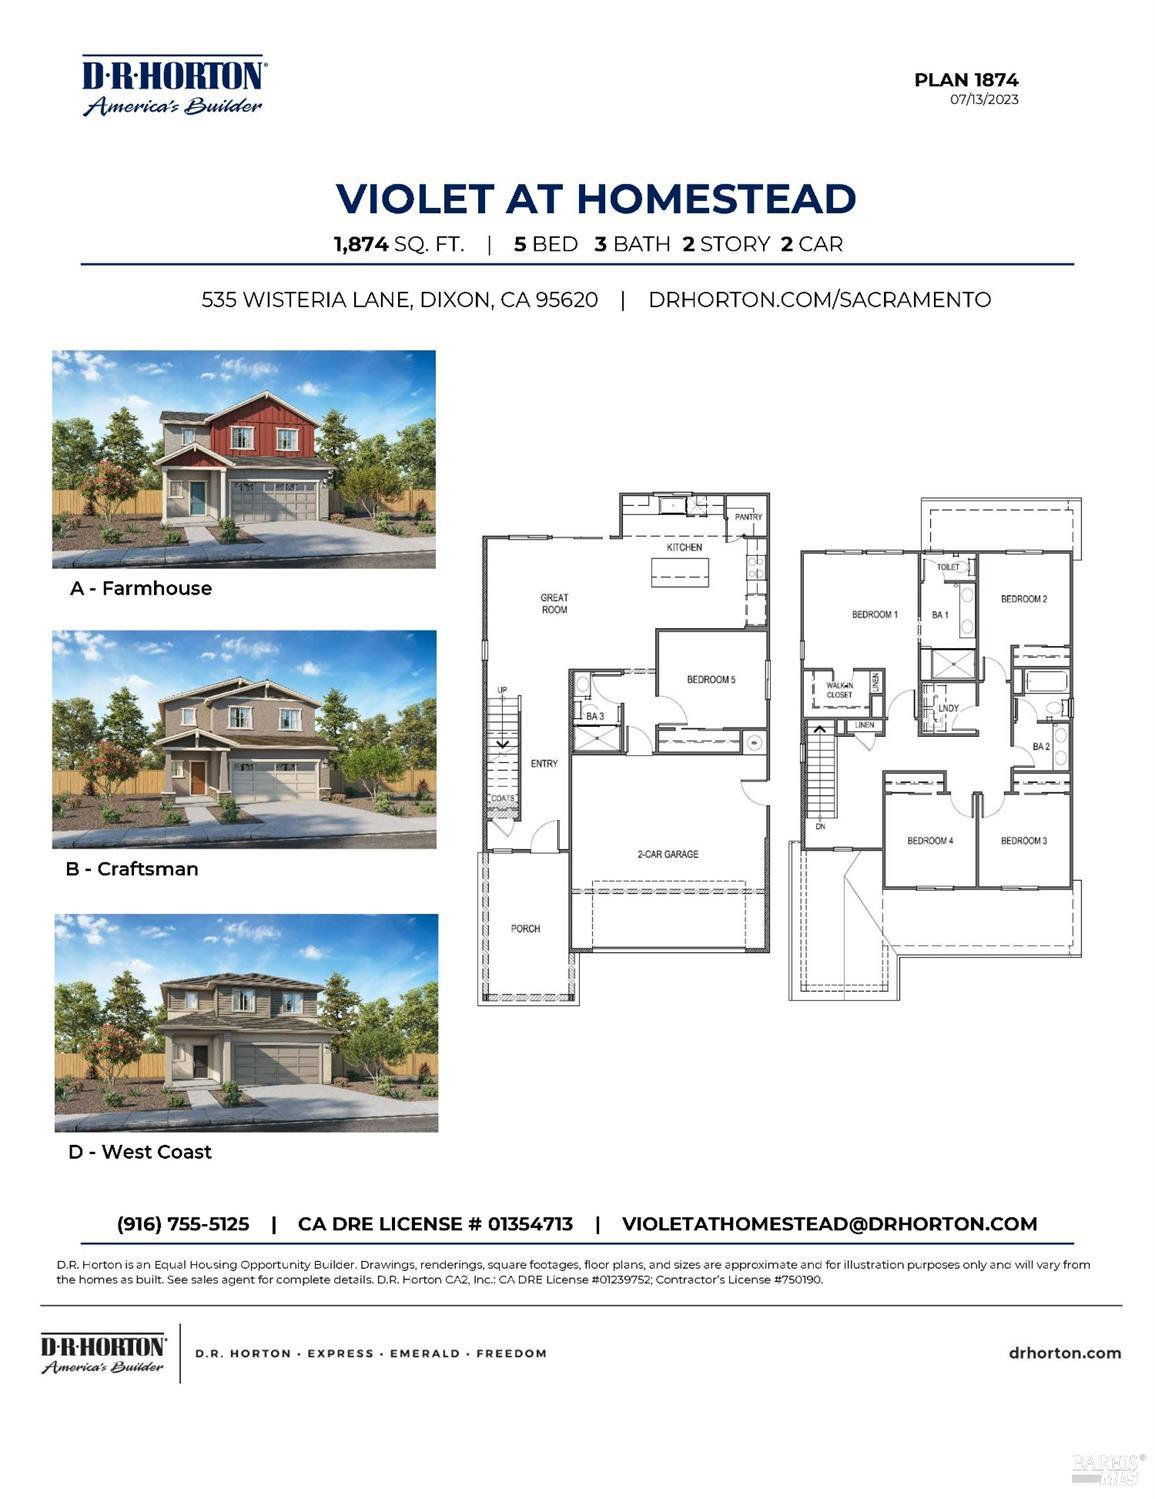 Brand new D.R. Horton home. Located in the sought after Homestead master planned community, this ope